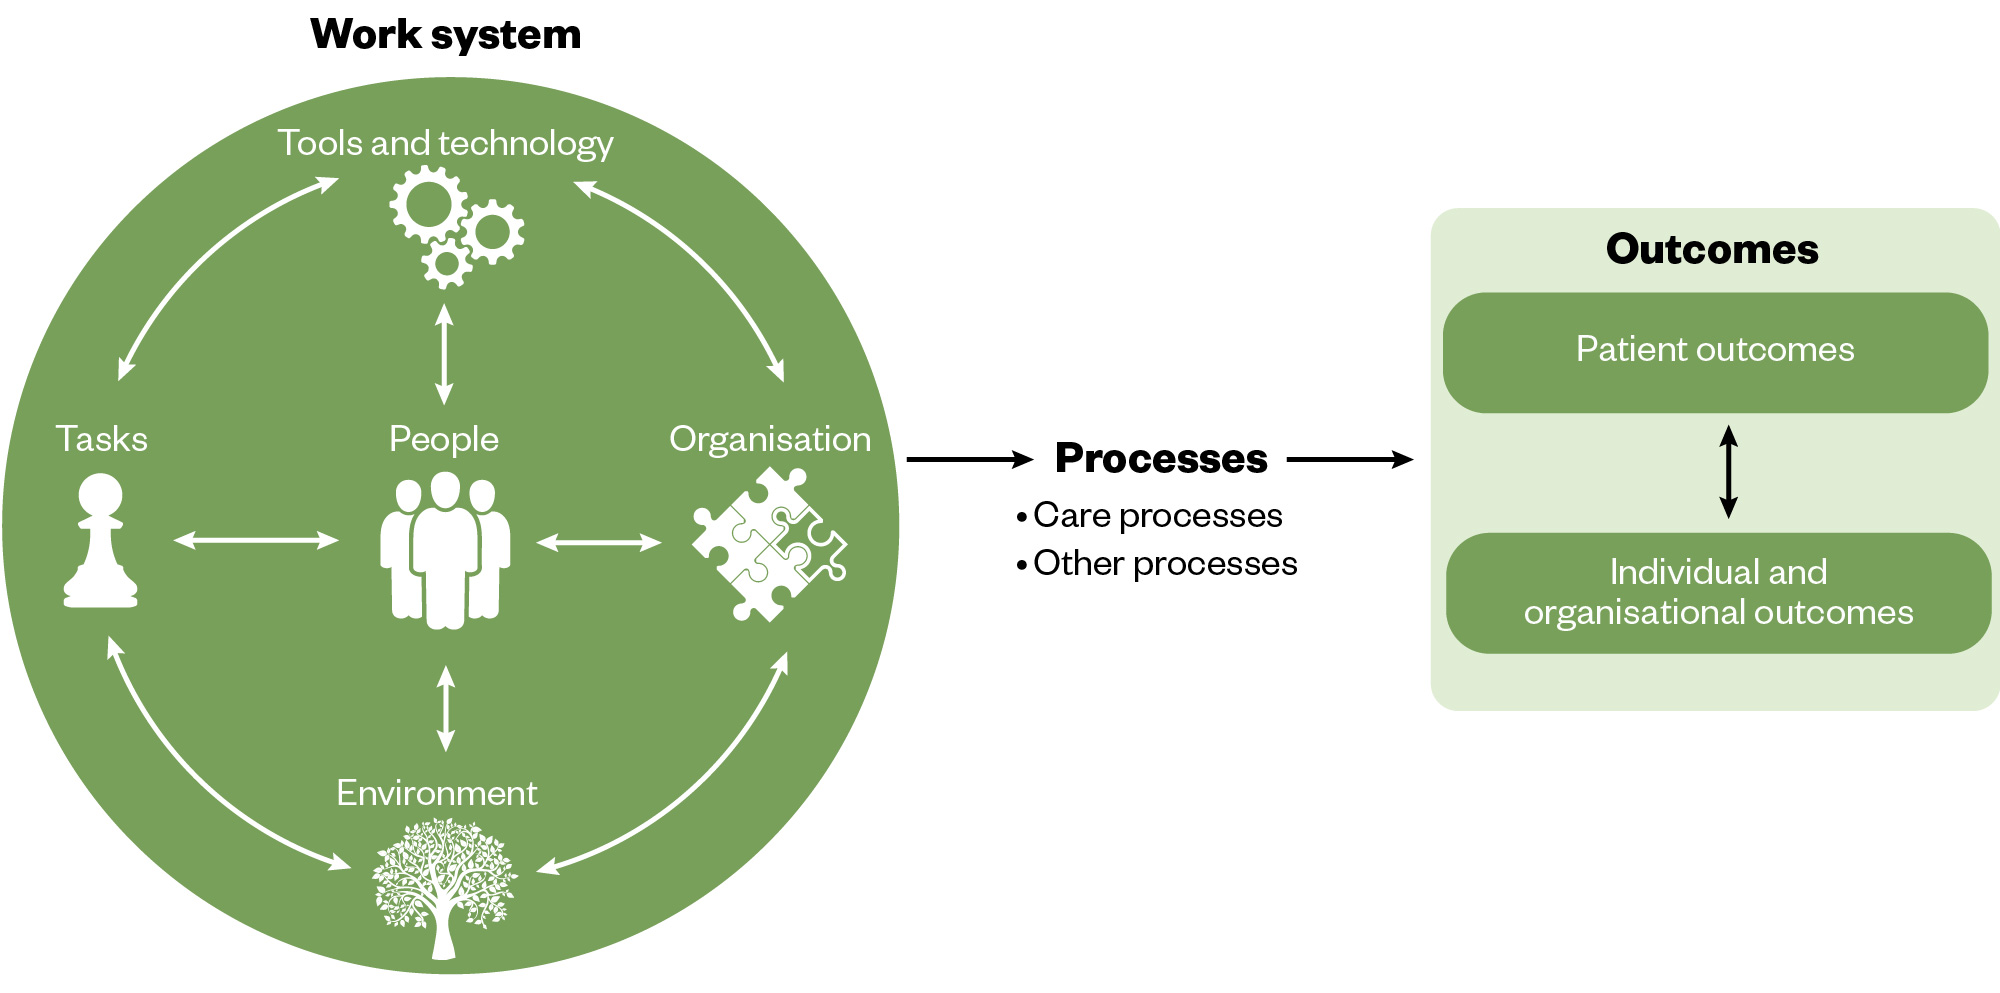 Diagram showing three stages of a process: work system (made up of interconnected Tools and Technology, Tasks, Organisation, Environment and People at the centre), which flows to Processes and finally Outcomes (for both patients and also individuals and organisations)